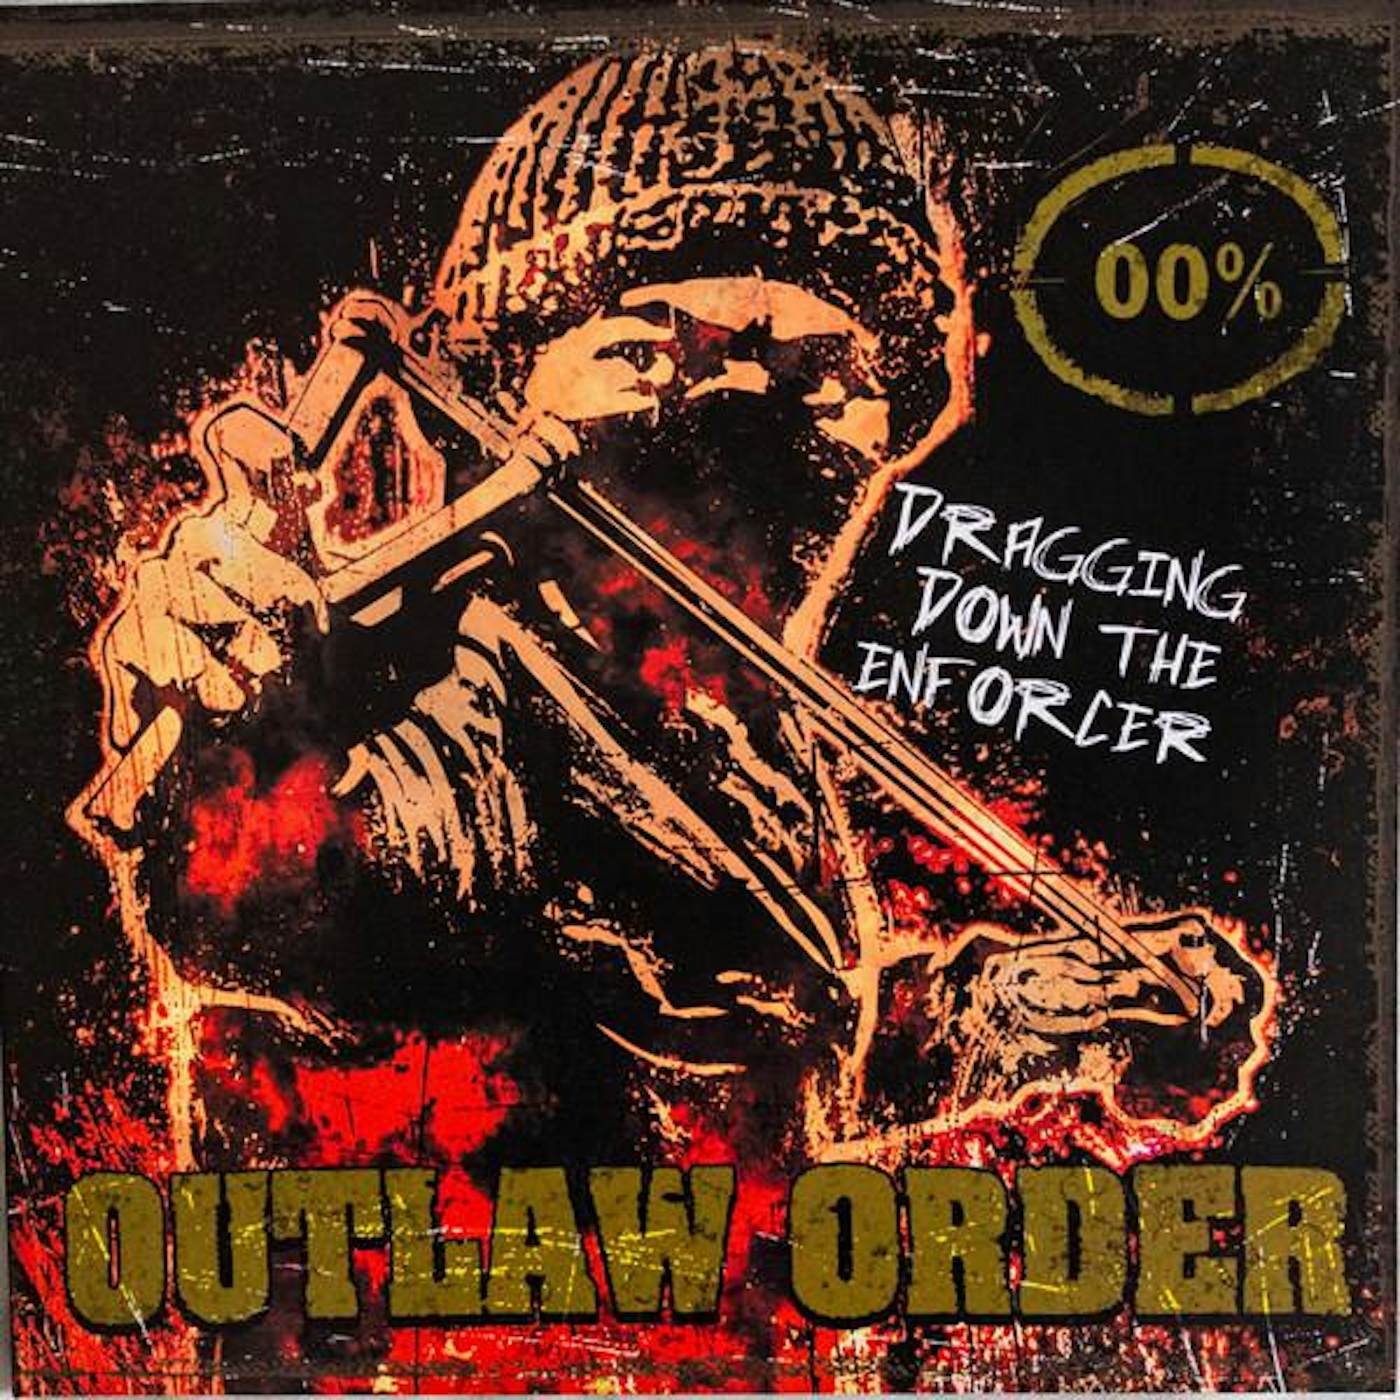 Outlaw Order Dragging Down the Enforcer Vinyl Record